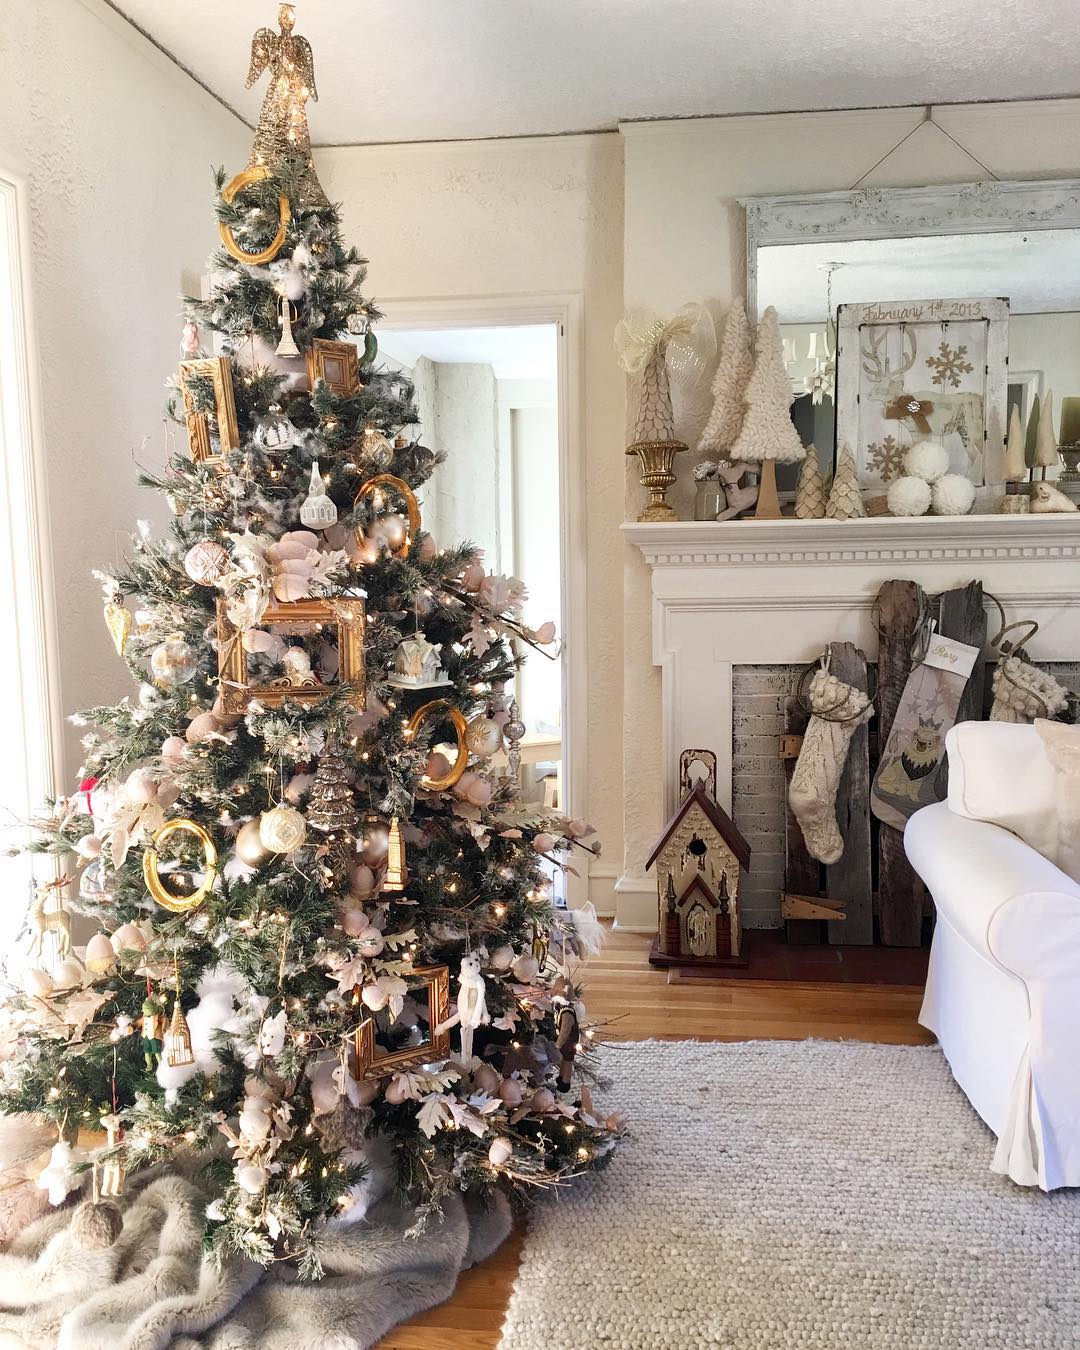 Wondering what christmas tree to buy and how much you should pay for it? Check out my ultimate guide to buying a christmas tree on Love to Home. Photo credit: @theblushingbean via Instagram